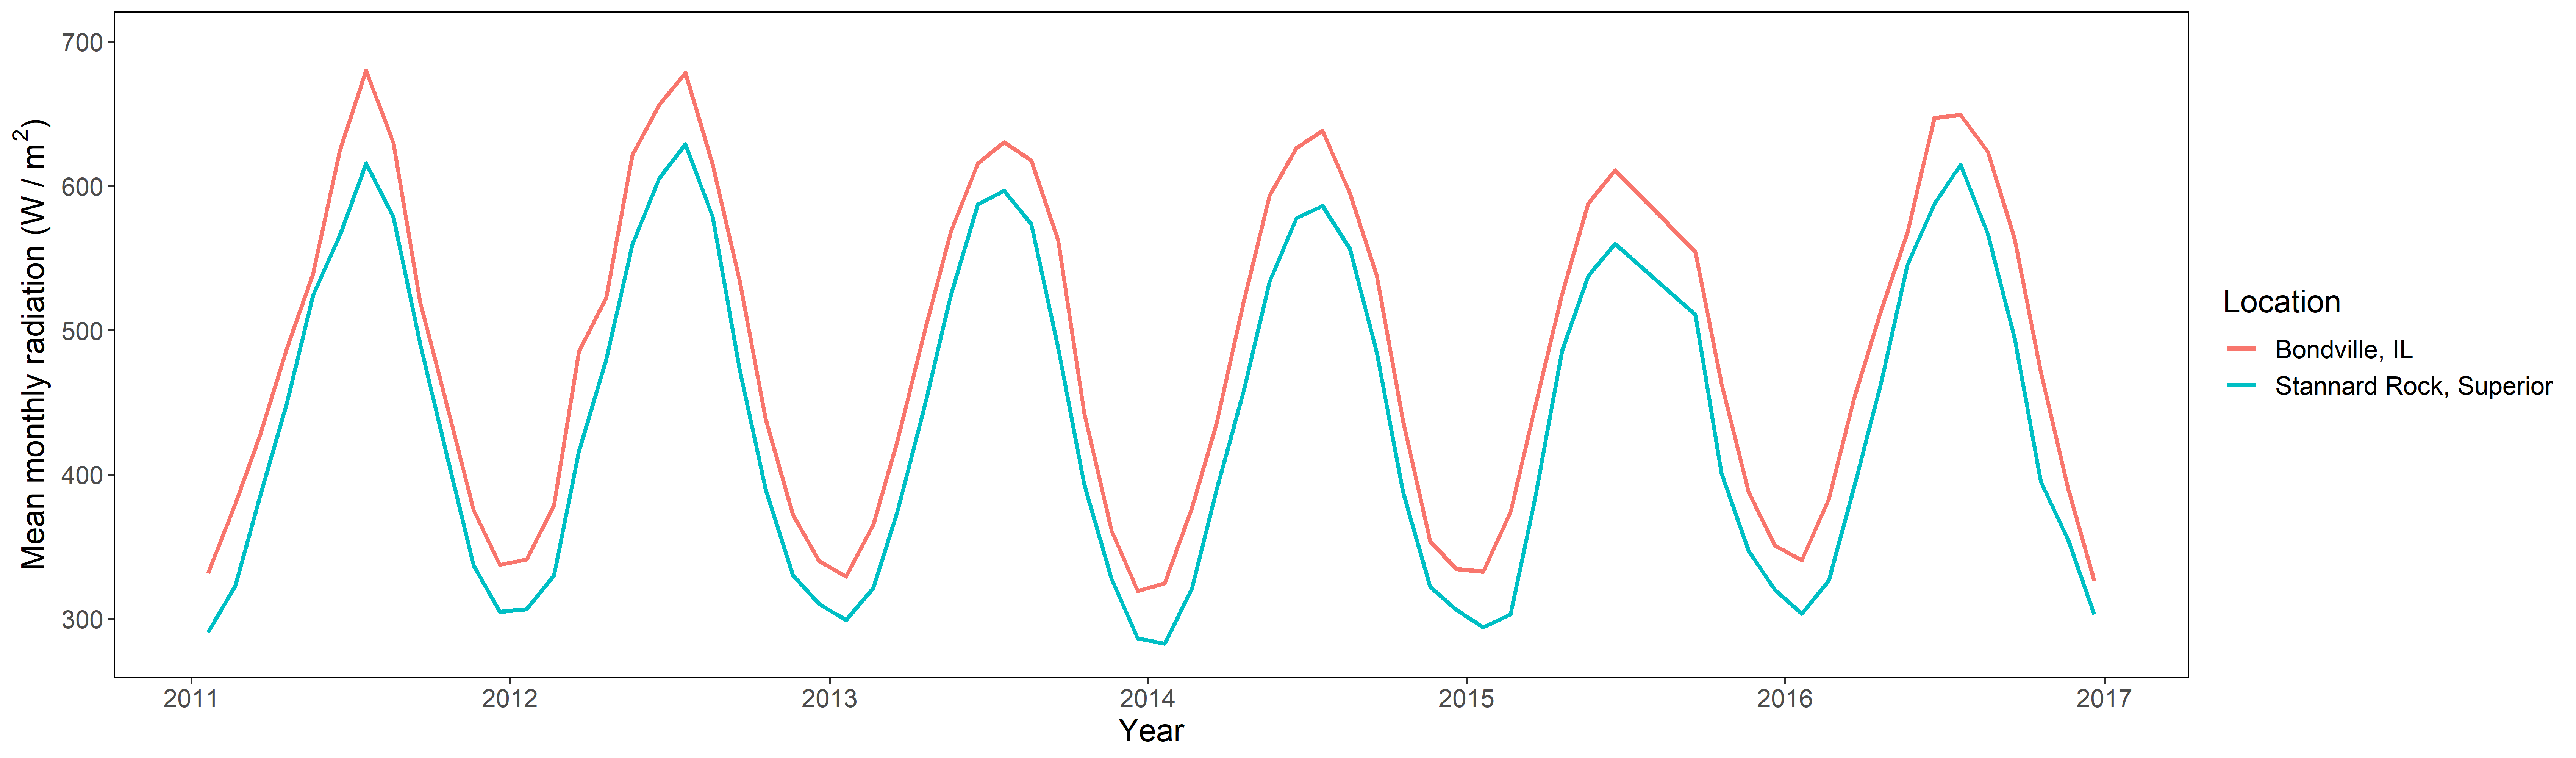 A sinusoidal plot of monthly averages to visually compare the slopes over time. Stannard Rock's values are lower due to it's higher latitude. July 2014 is missing values.